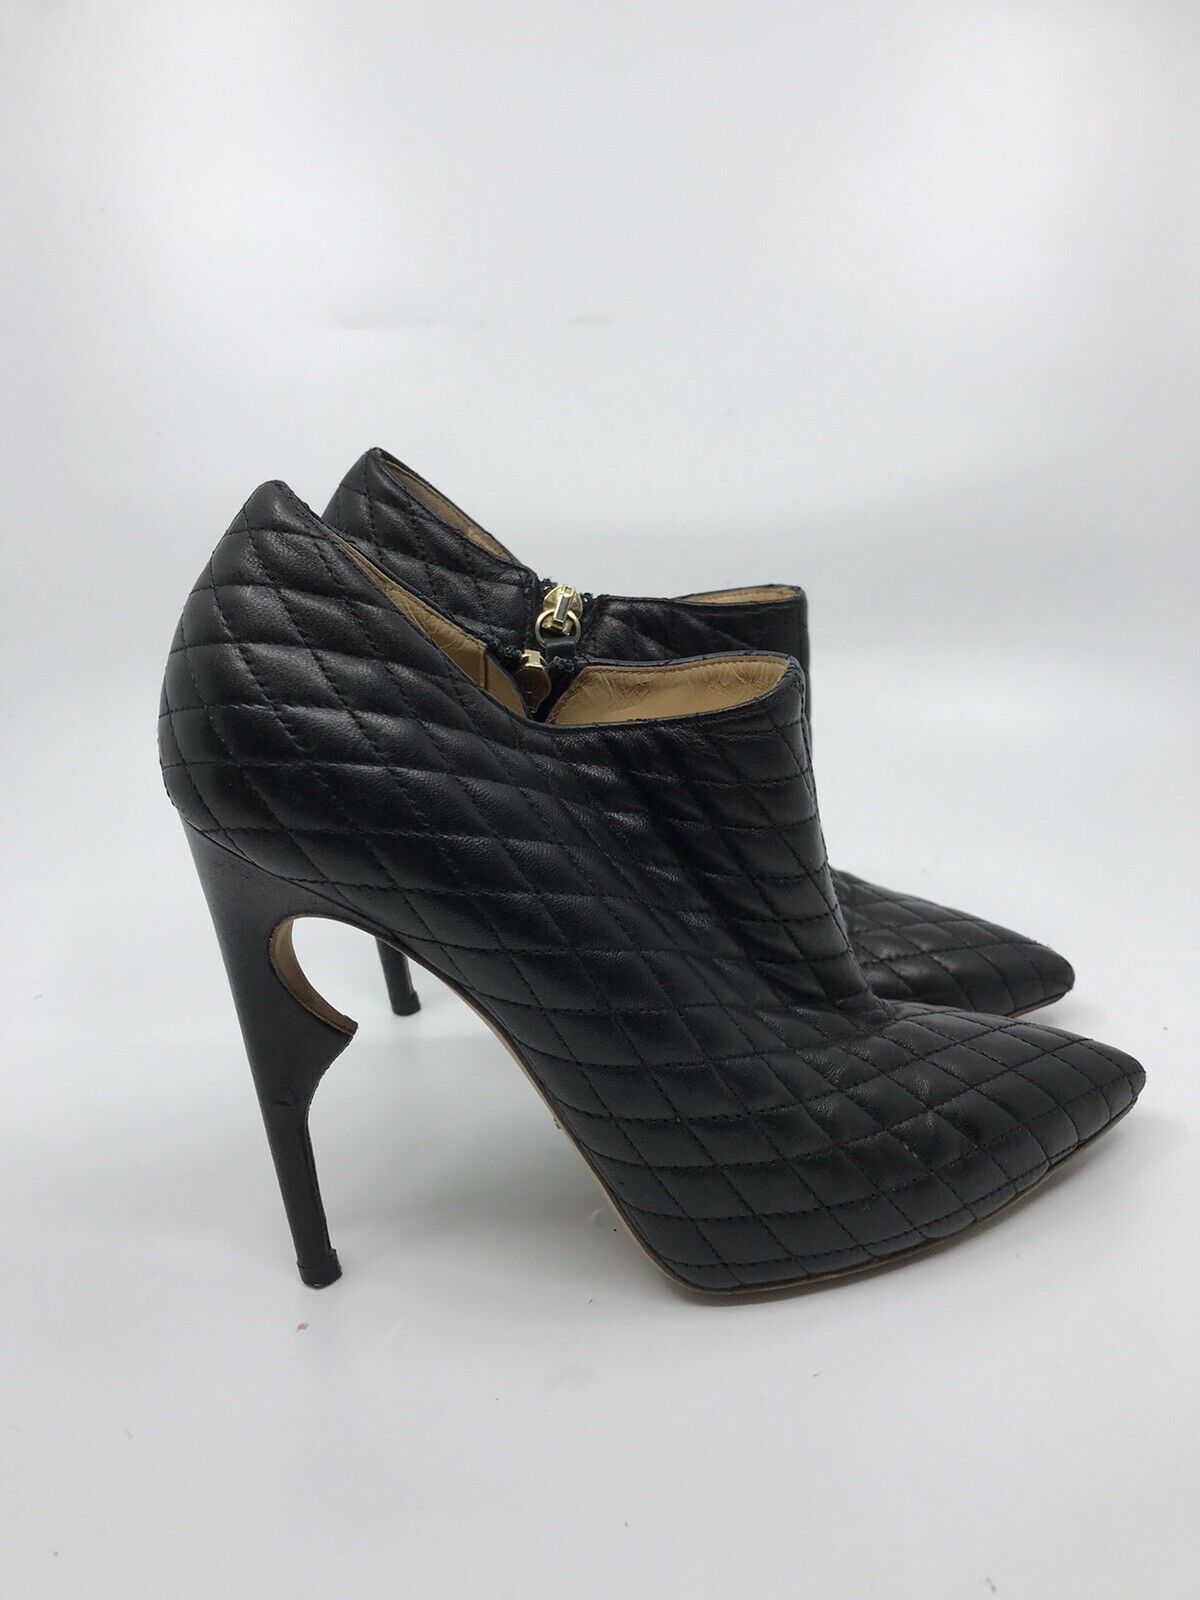 JEROME C ROUSSEAU Black Leather Quilted High Heel Boots 37